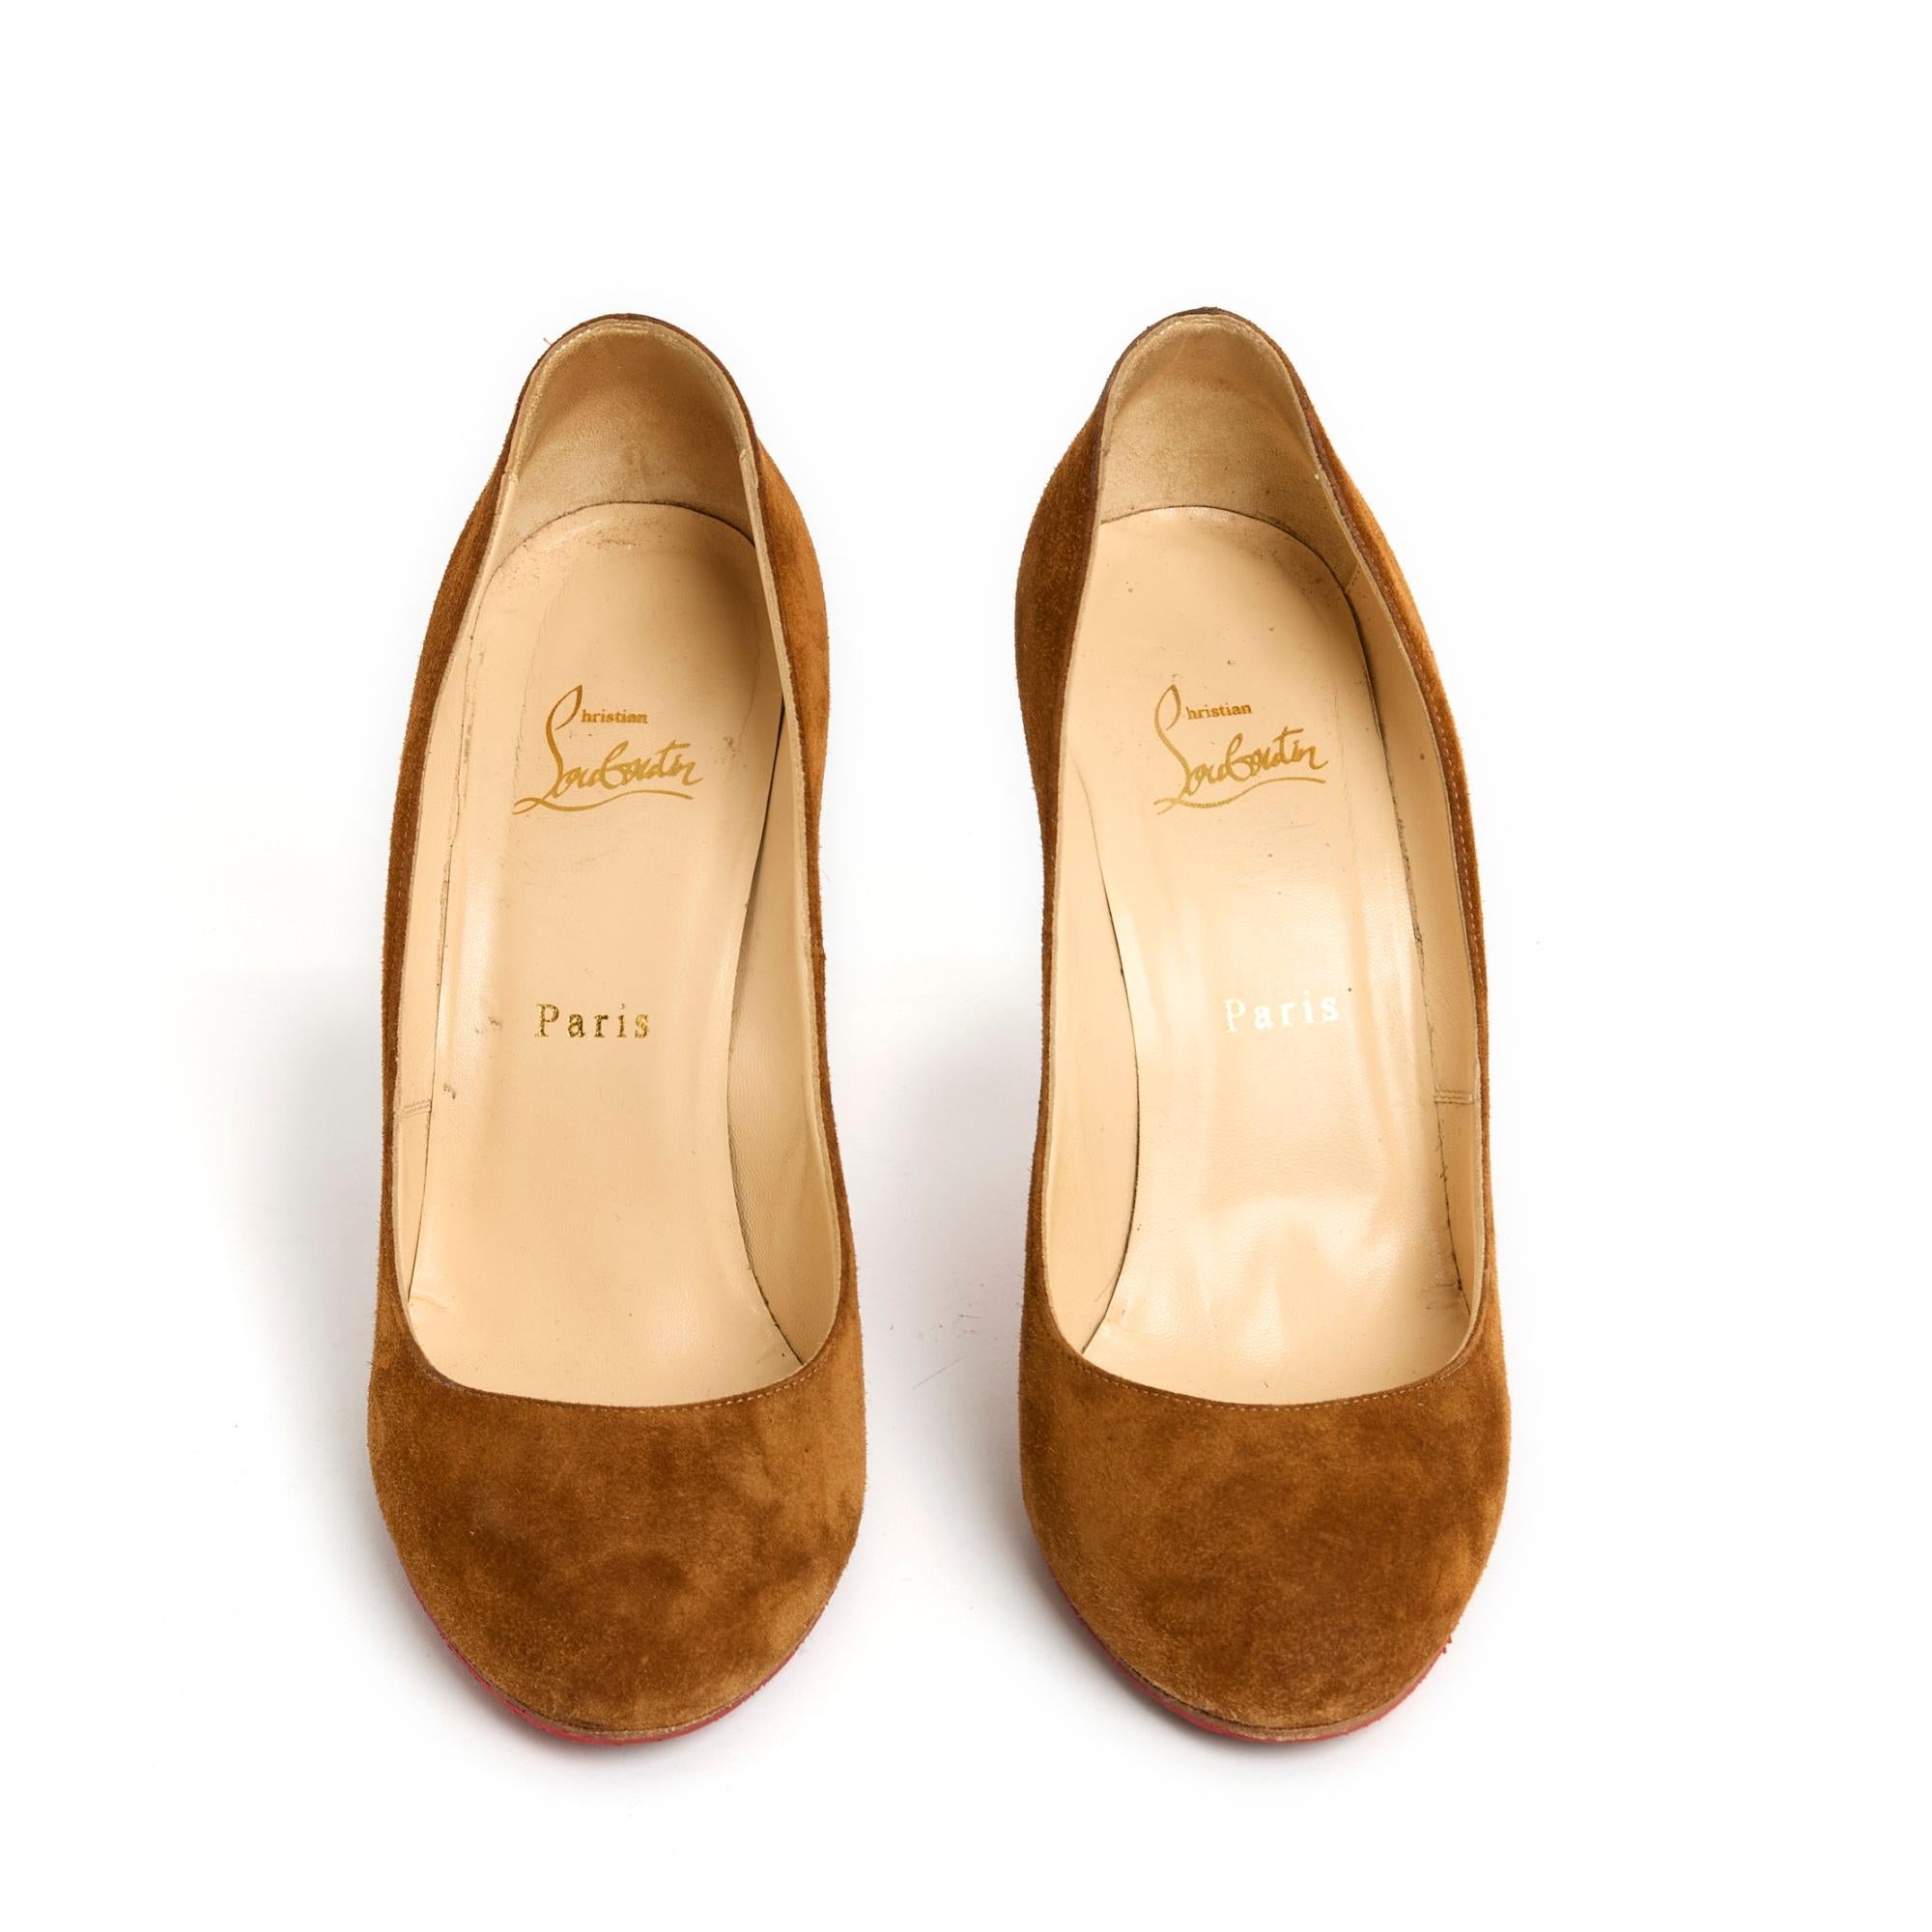 Christian Louboutin Fifi model pumps in camel-colored suede. Size 39.5FR i.e. UK6 and US7.5, heel 10 cm (11 cm less front insole 1 cm), insole 25.4 cm. The pumps were resoled at Louboutin... and this is surprising because the pumps are in perfect